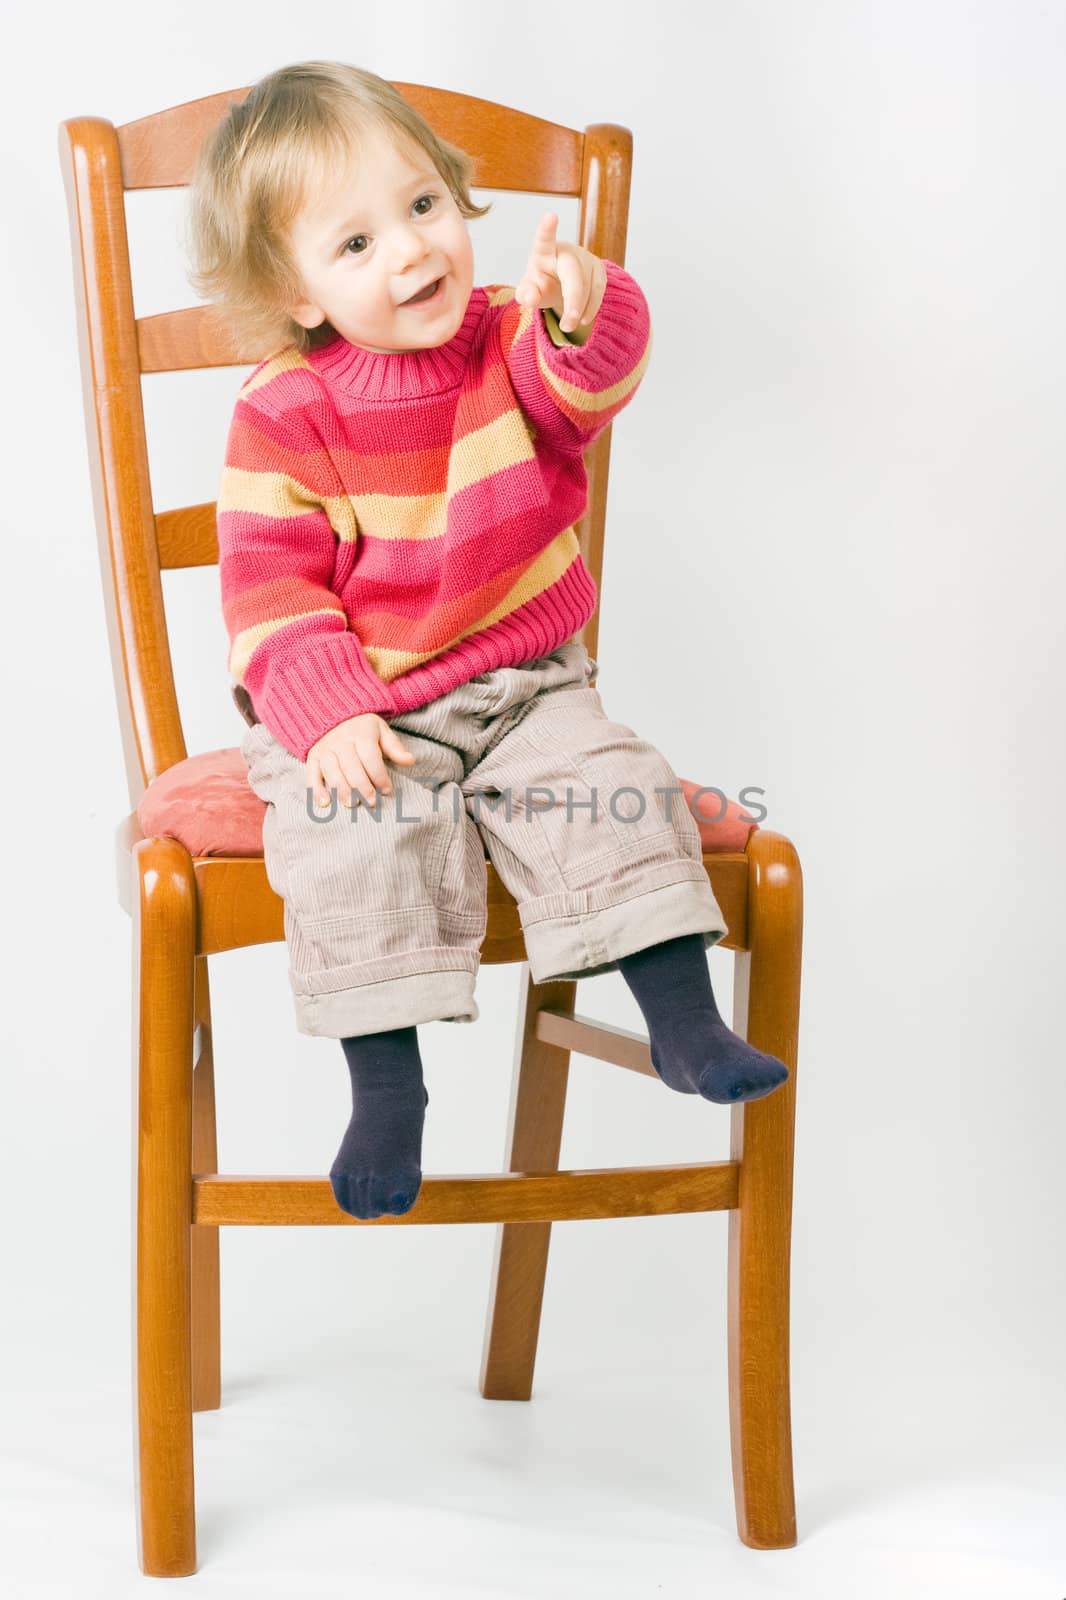 Child on a chair by ecobo